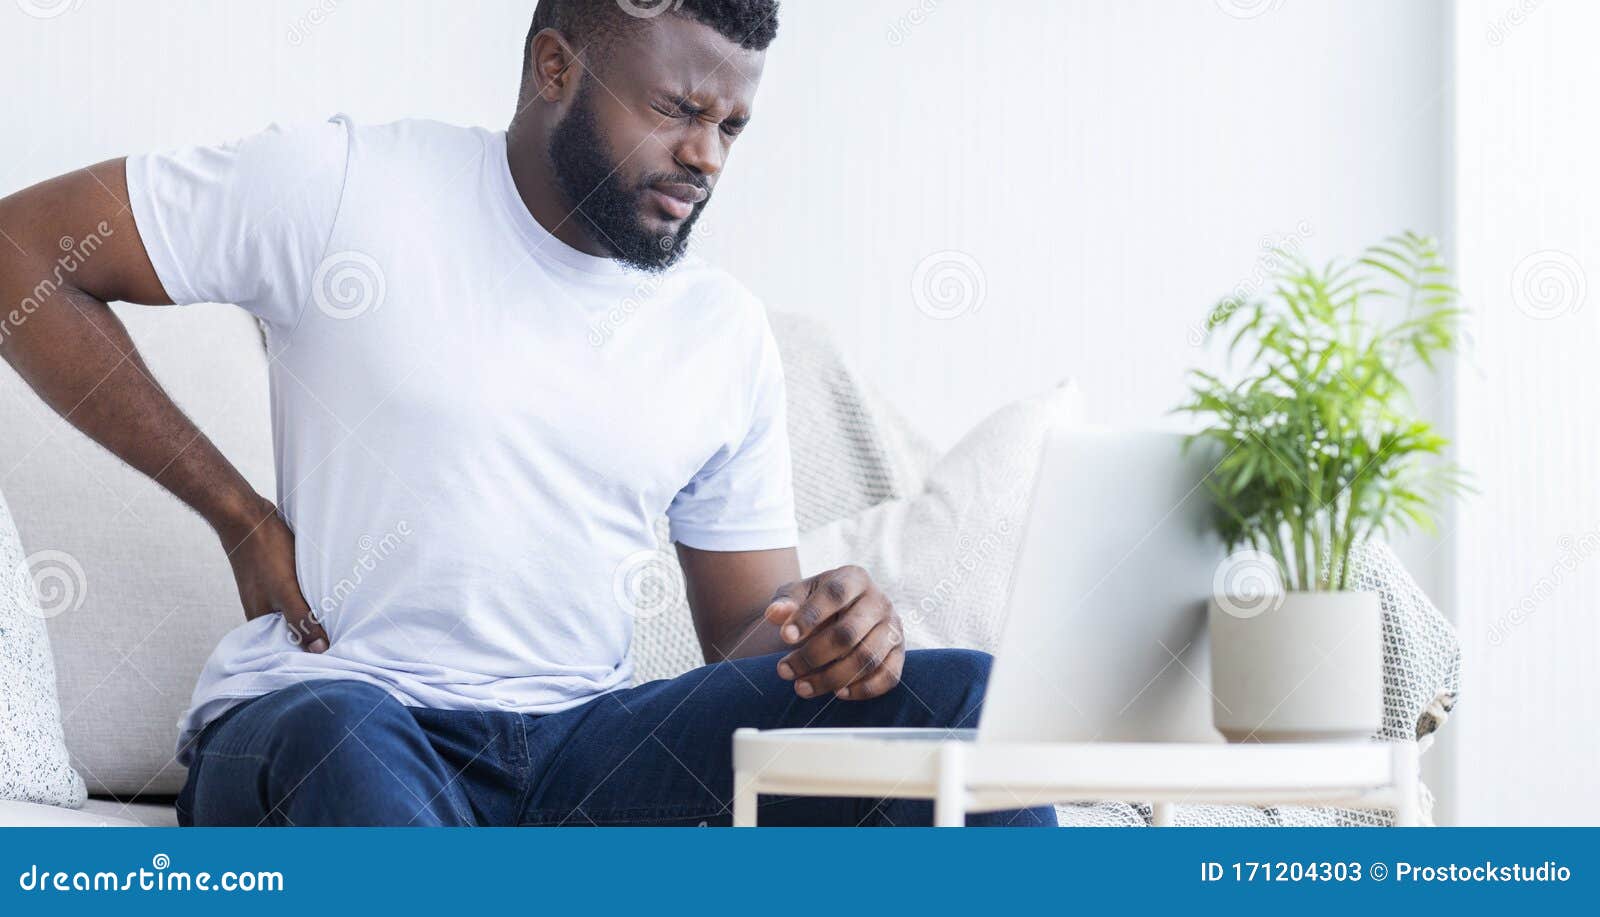 young black man touching his sore back, working on laptop